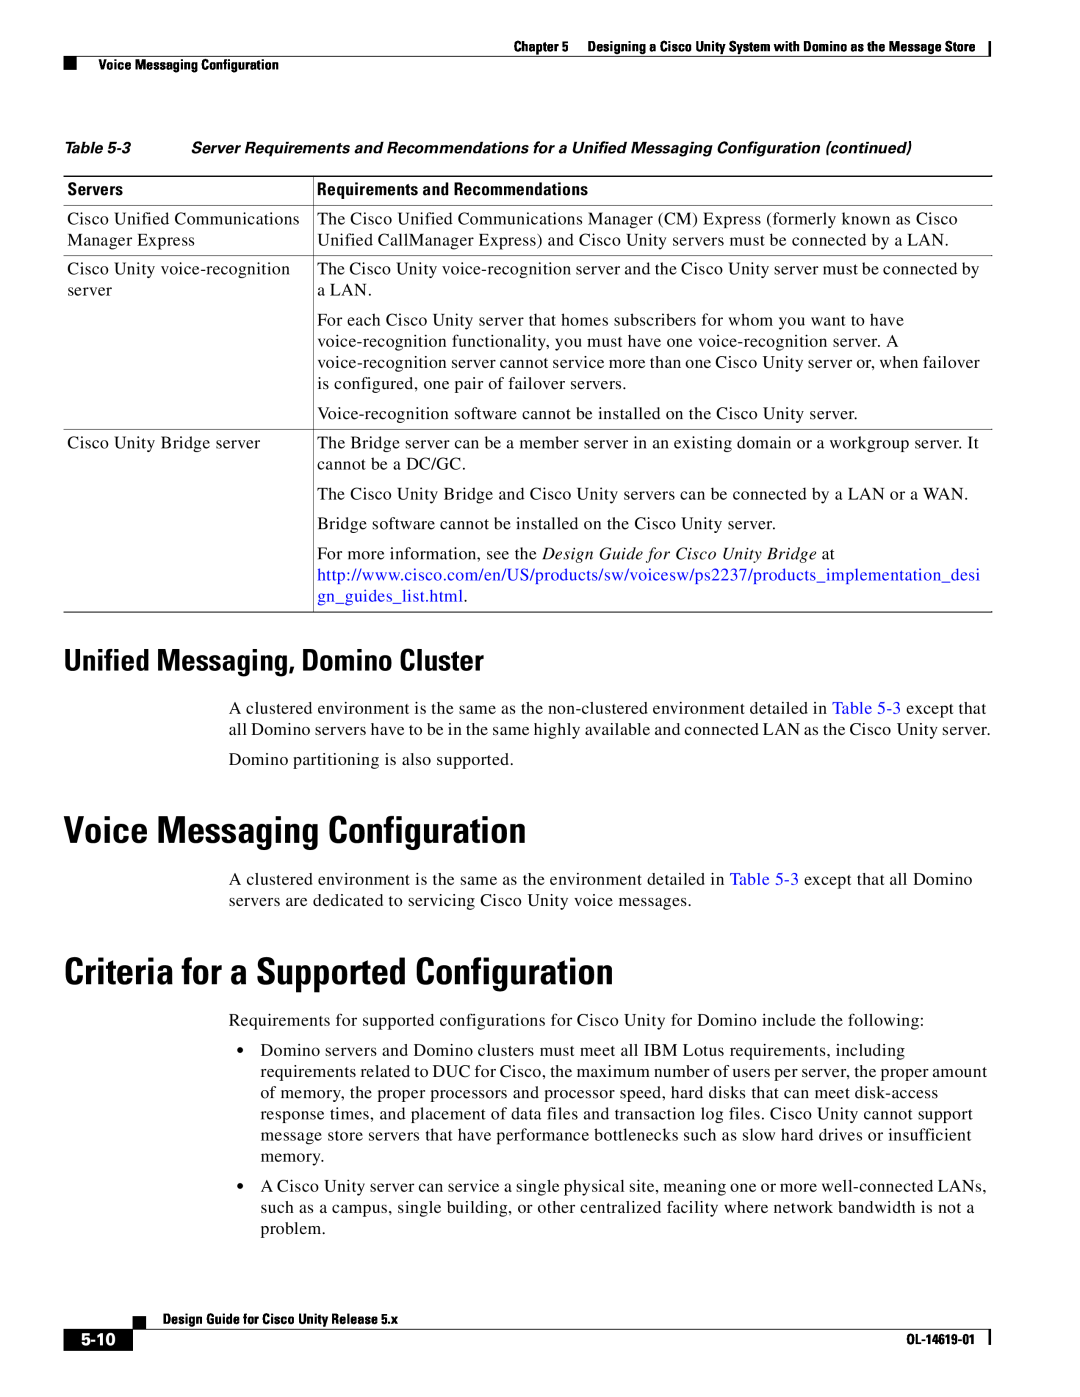 Cisco Systems OL-14619-01 Voice Messaging Configuration, Criteria for a Supported Configuration, gnguideslist.html, 5-10 